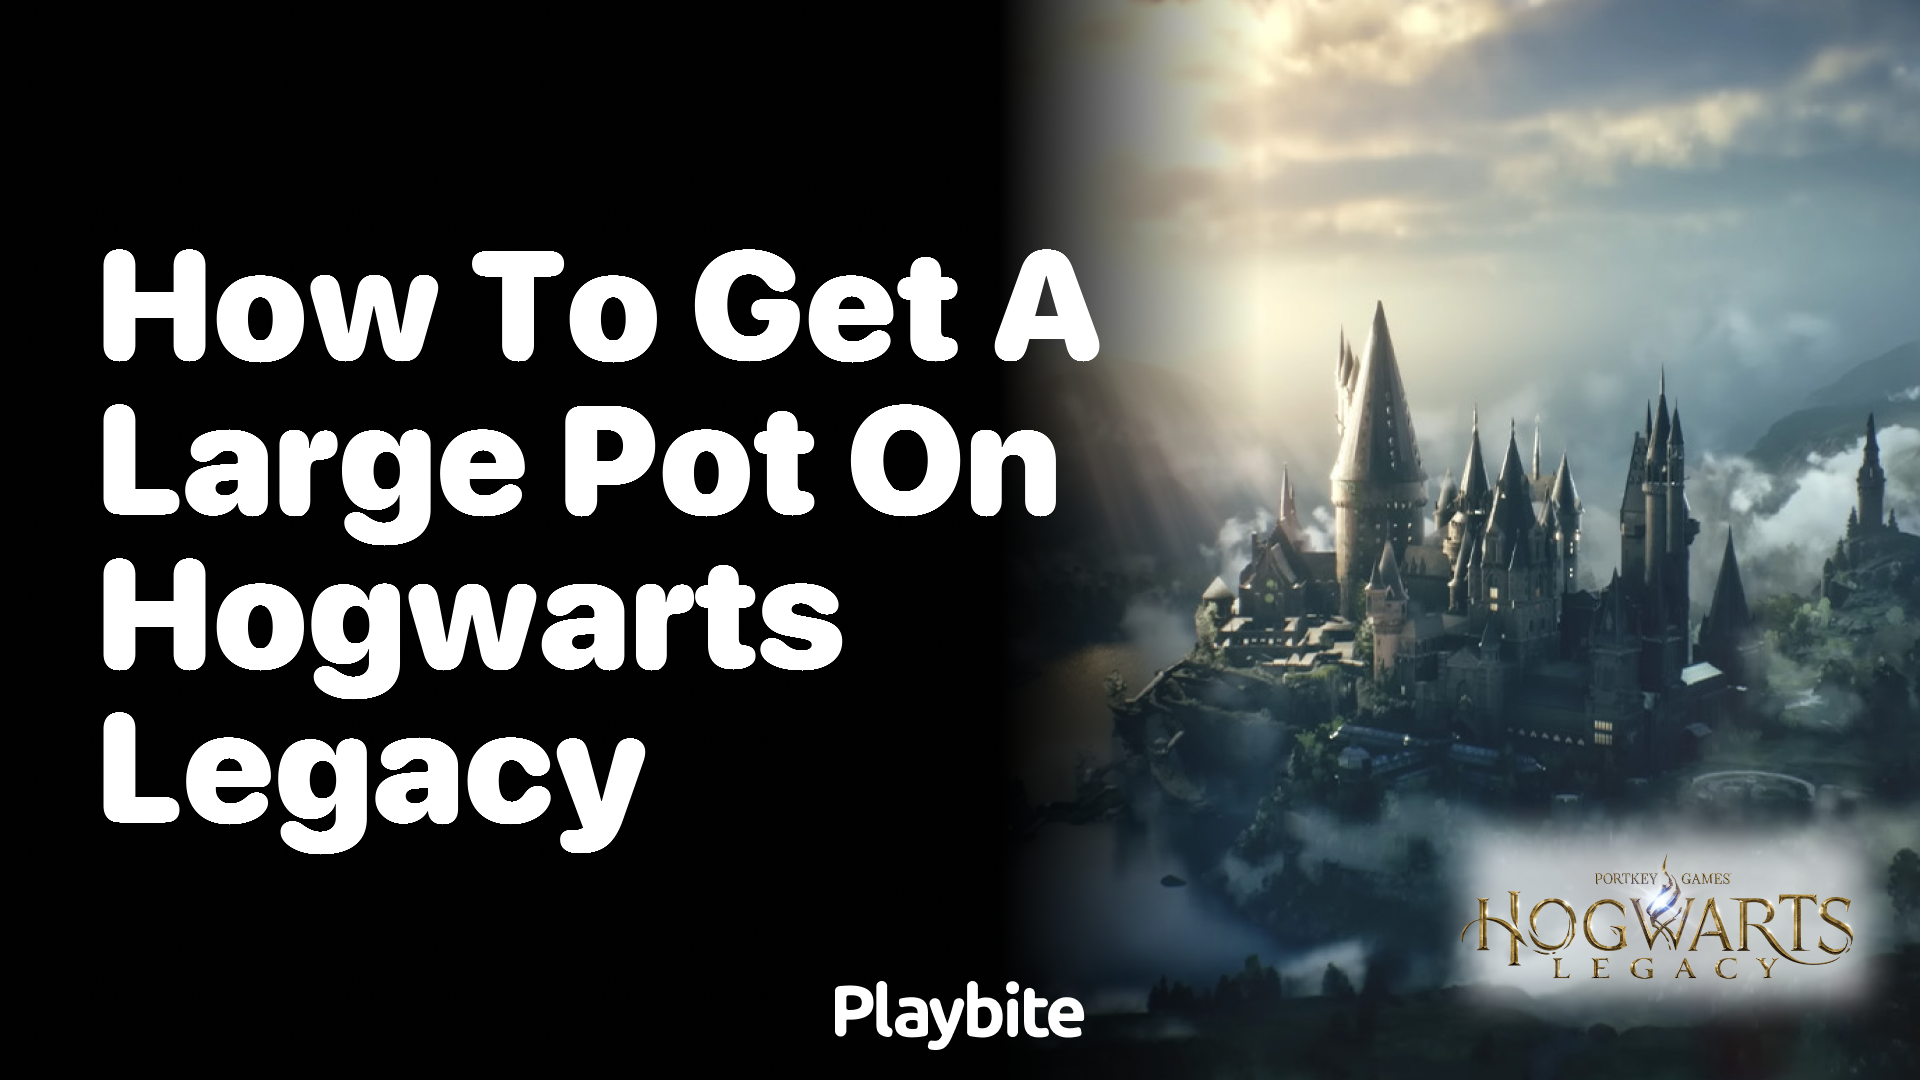 How to Get a Large Pot on Hogwarts Legacy